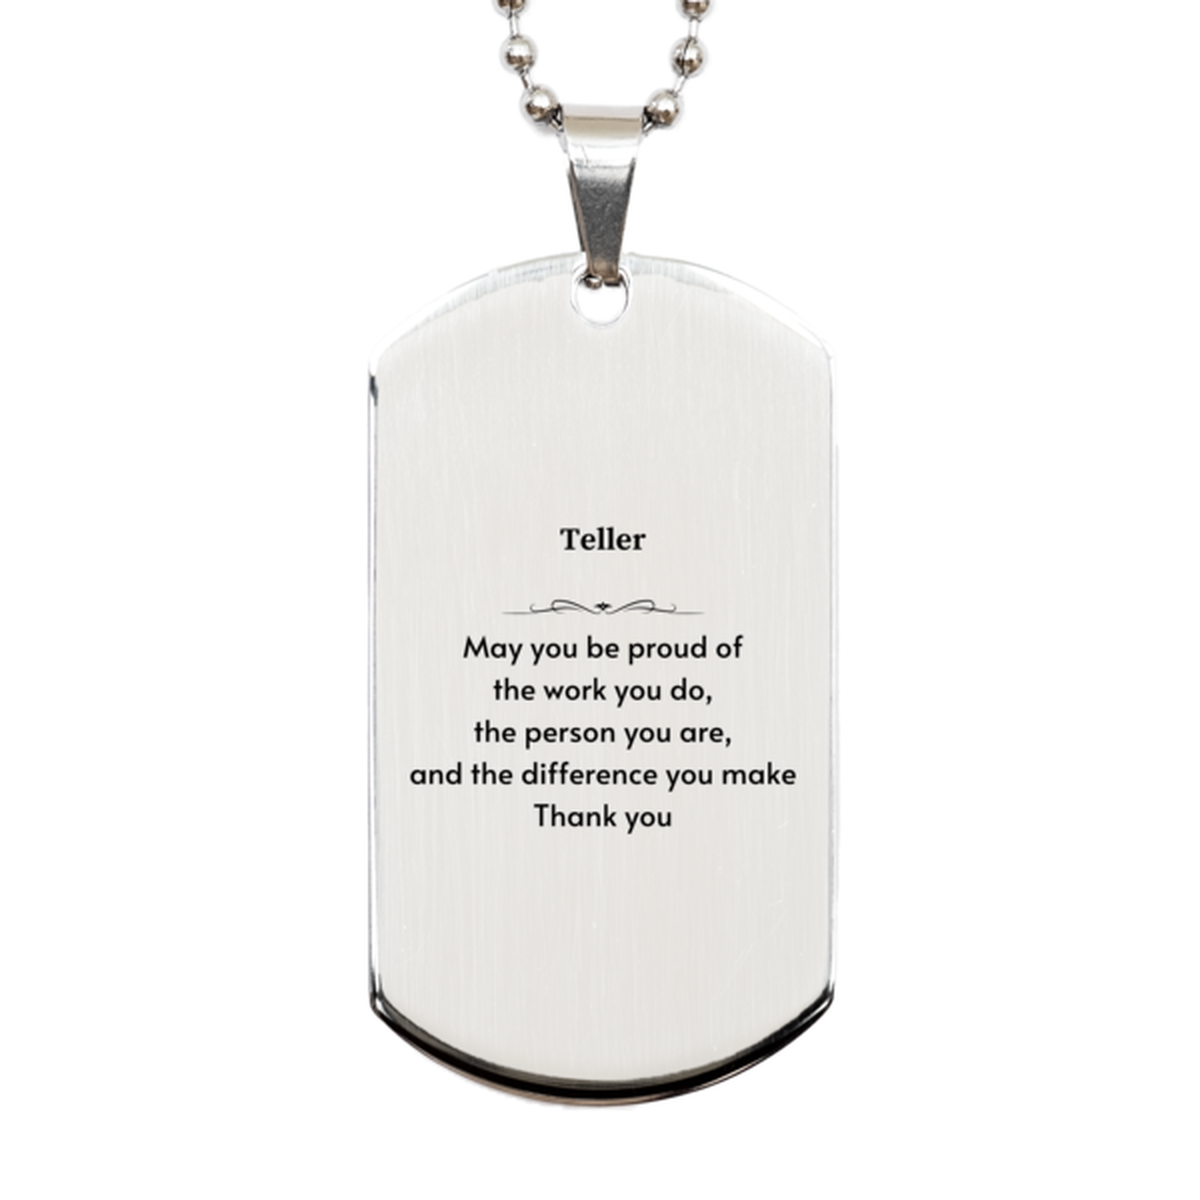 Heartwarming Silver Dog Tag Retirement Coworkers Gifts for Teller, Teller May You be proud of the work you do, the person you are Gifts for Boss Men Women Friends